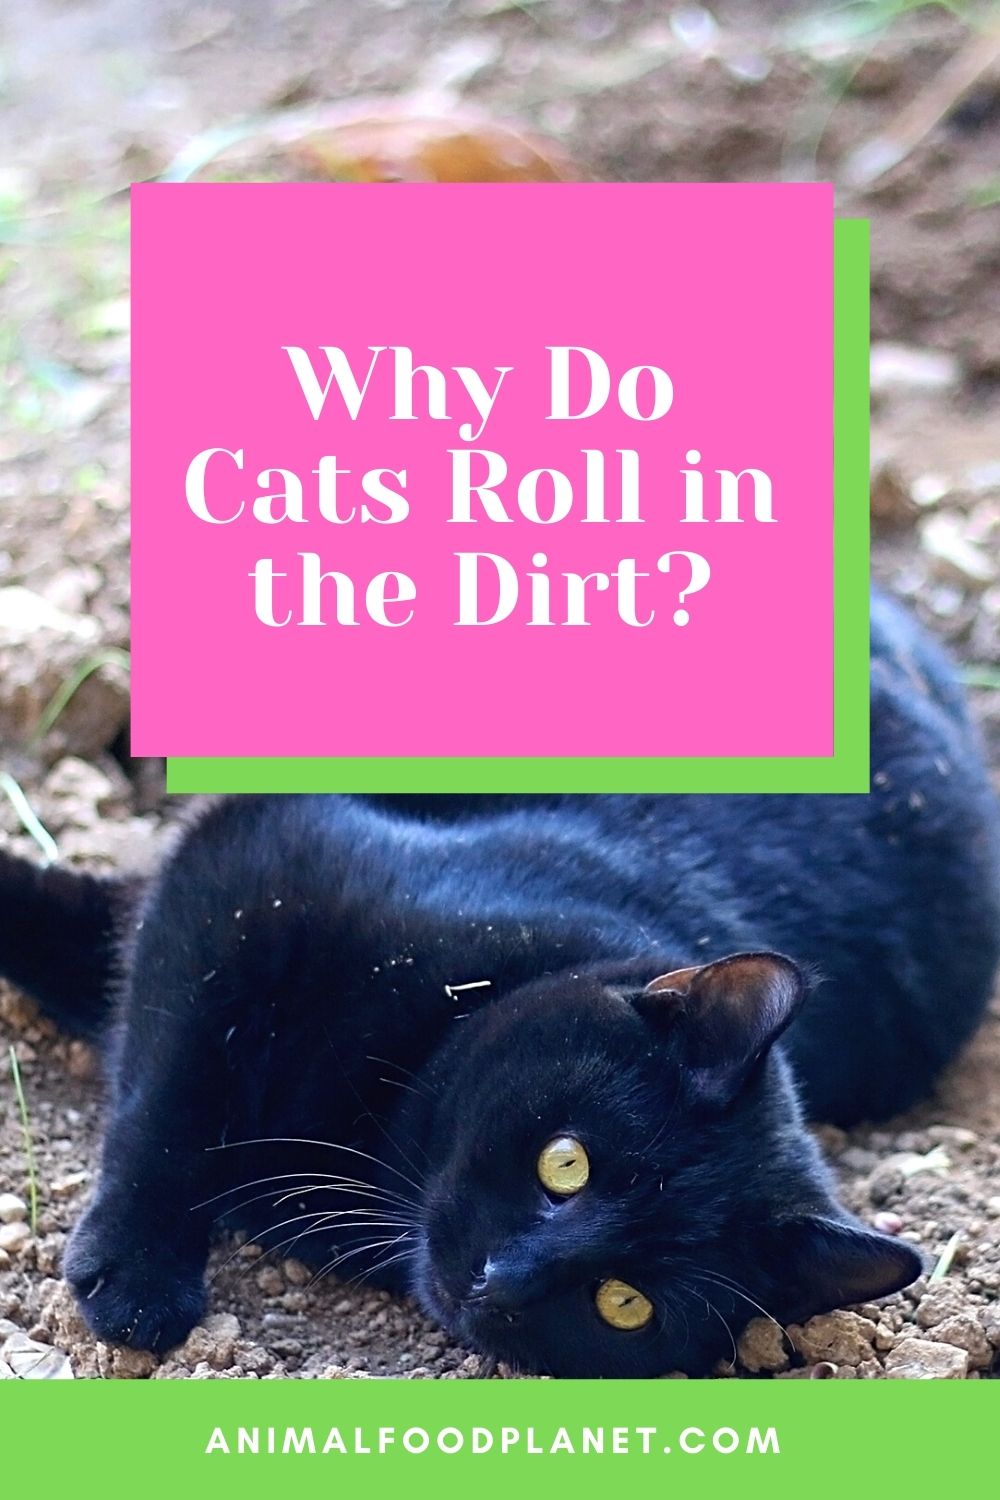 Why Do Cats Roll in the Dirt